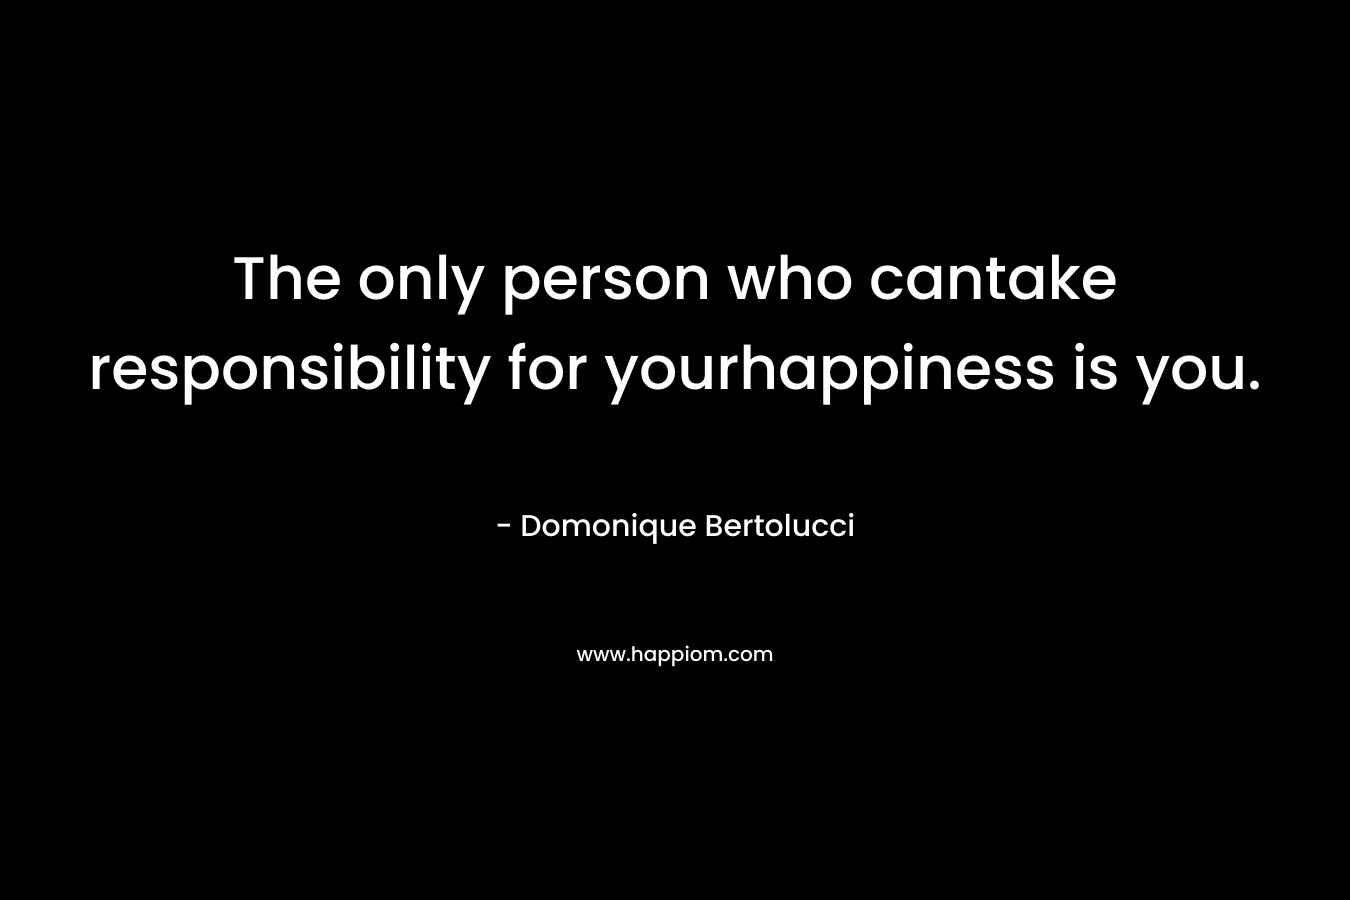 The only person who cantake responsibility for yourhappiness is you. – Domonique Bertolucci